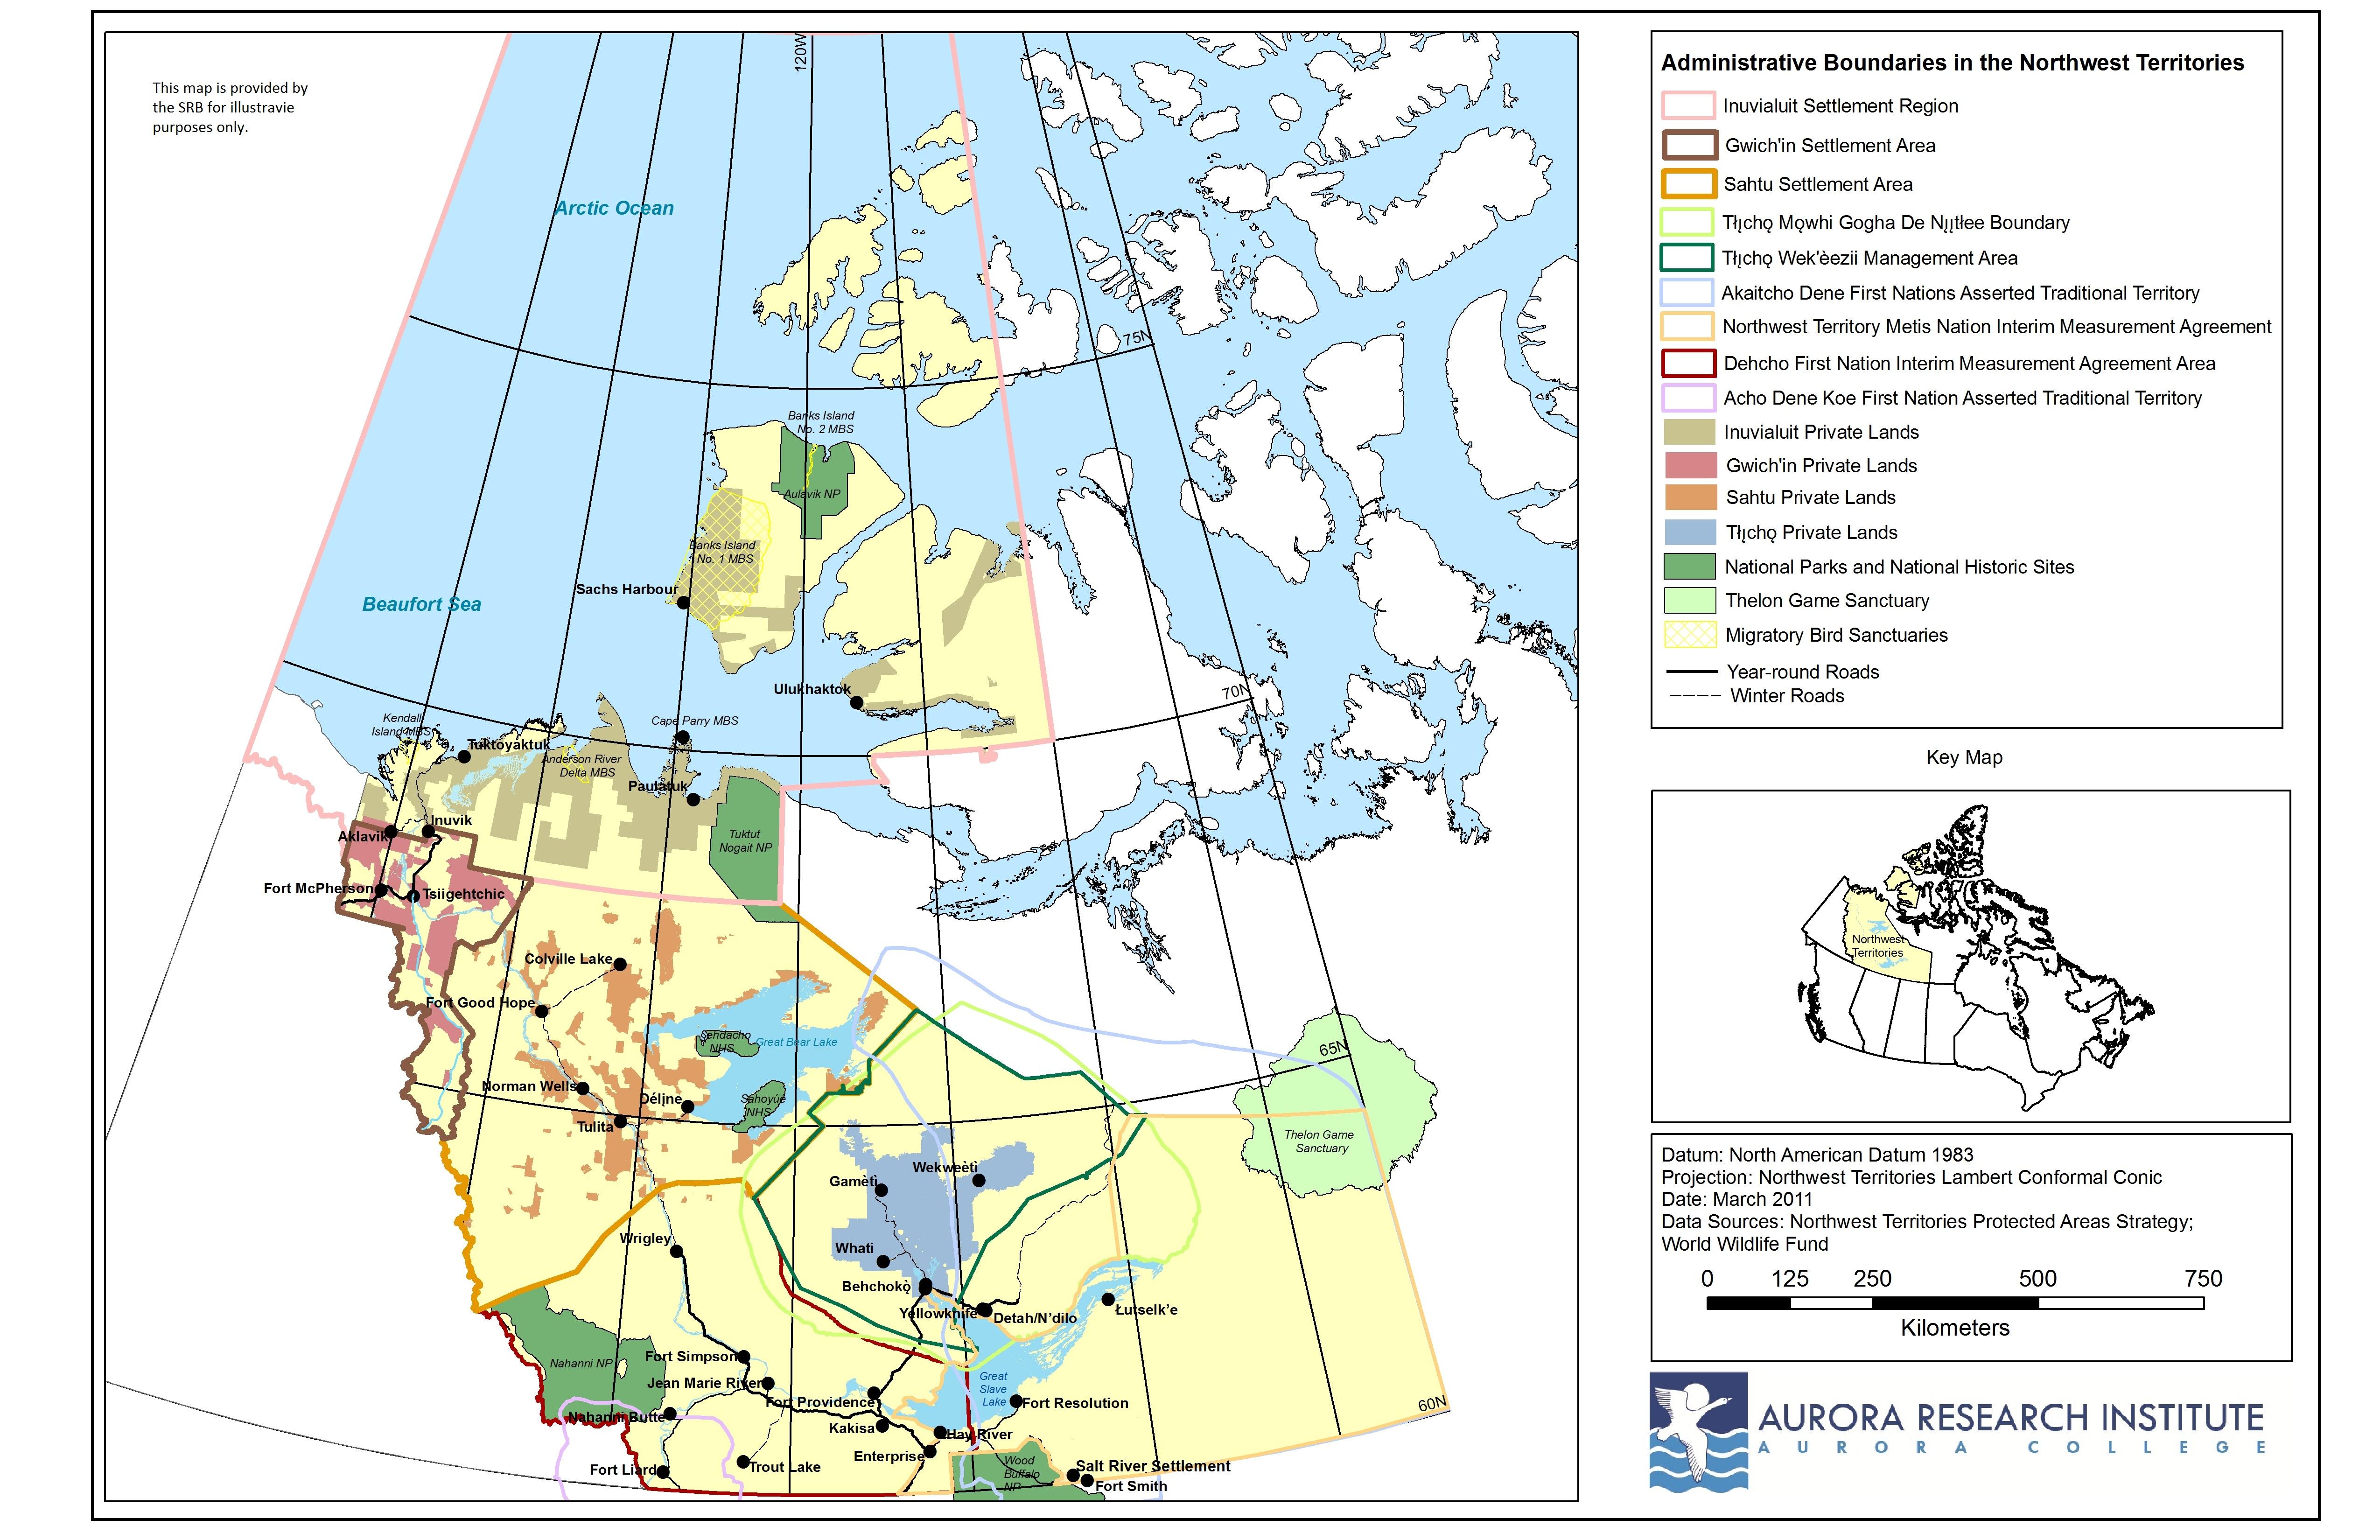 Map of Administrative Boundaries in the Northwest Territories